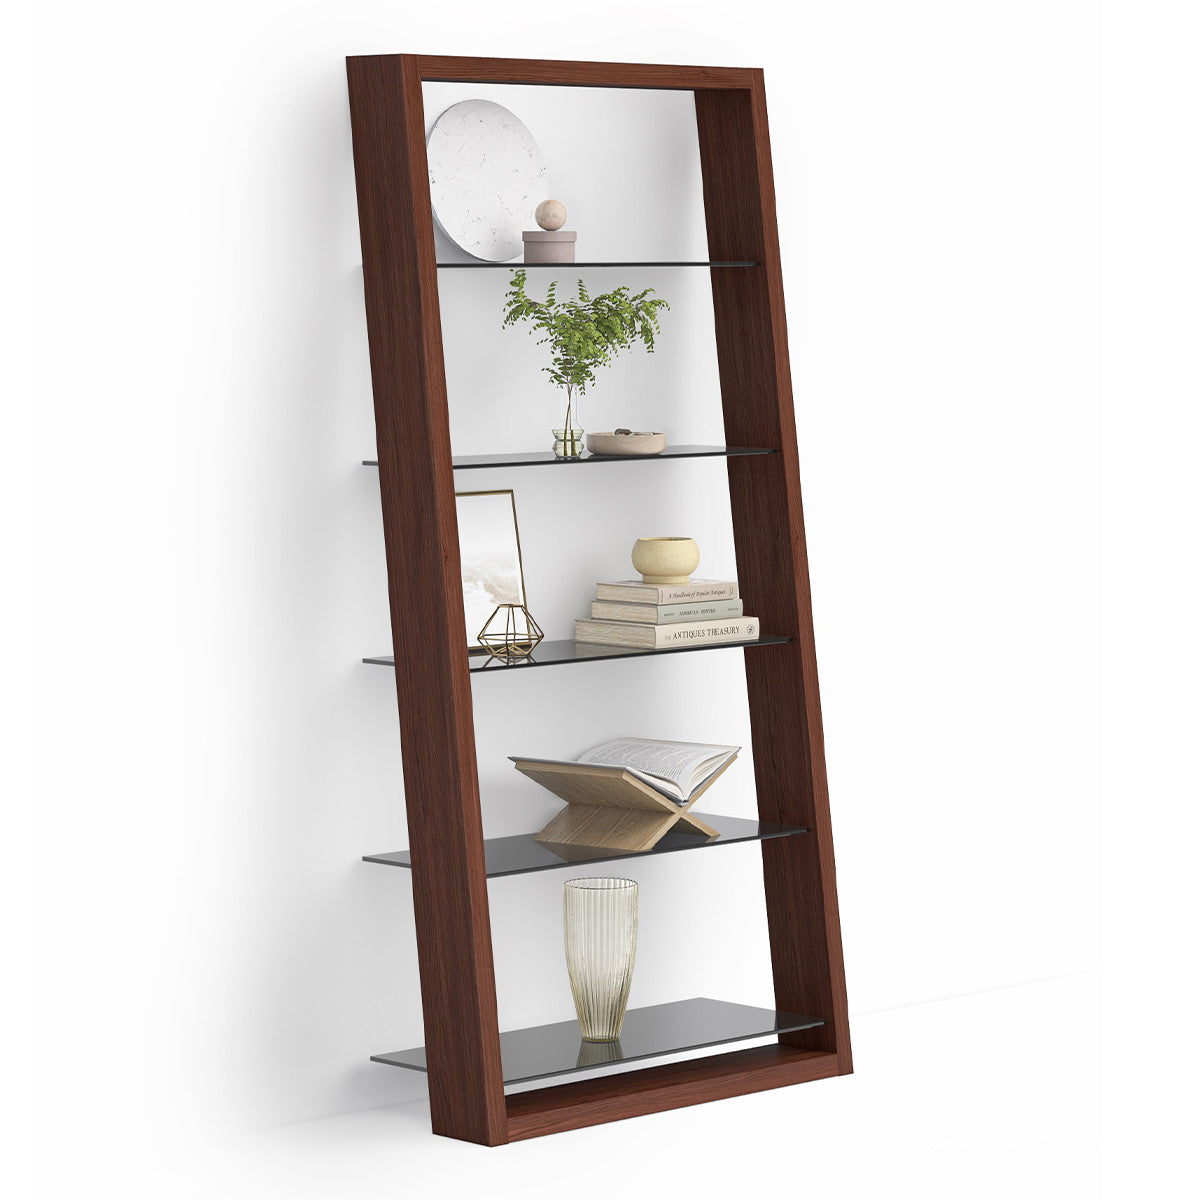 BDI Eileen 2.0 5166 Leaning Shelf with Grey-Tinted Glass Shelves (Chocolate Stained Walnut)